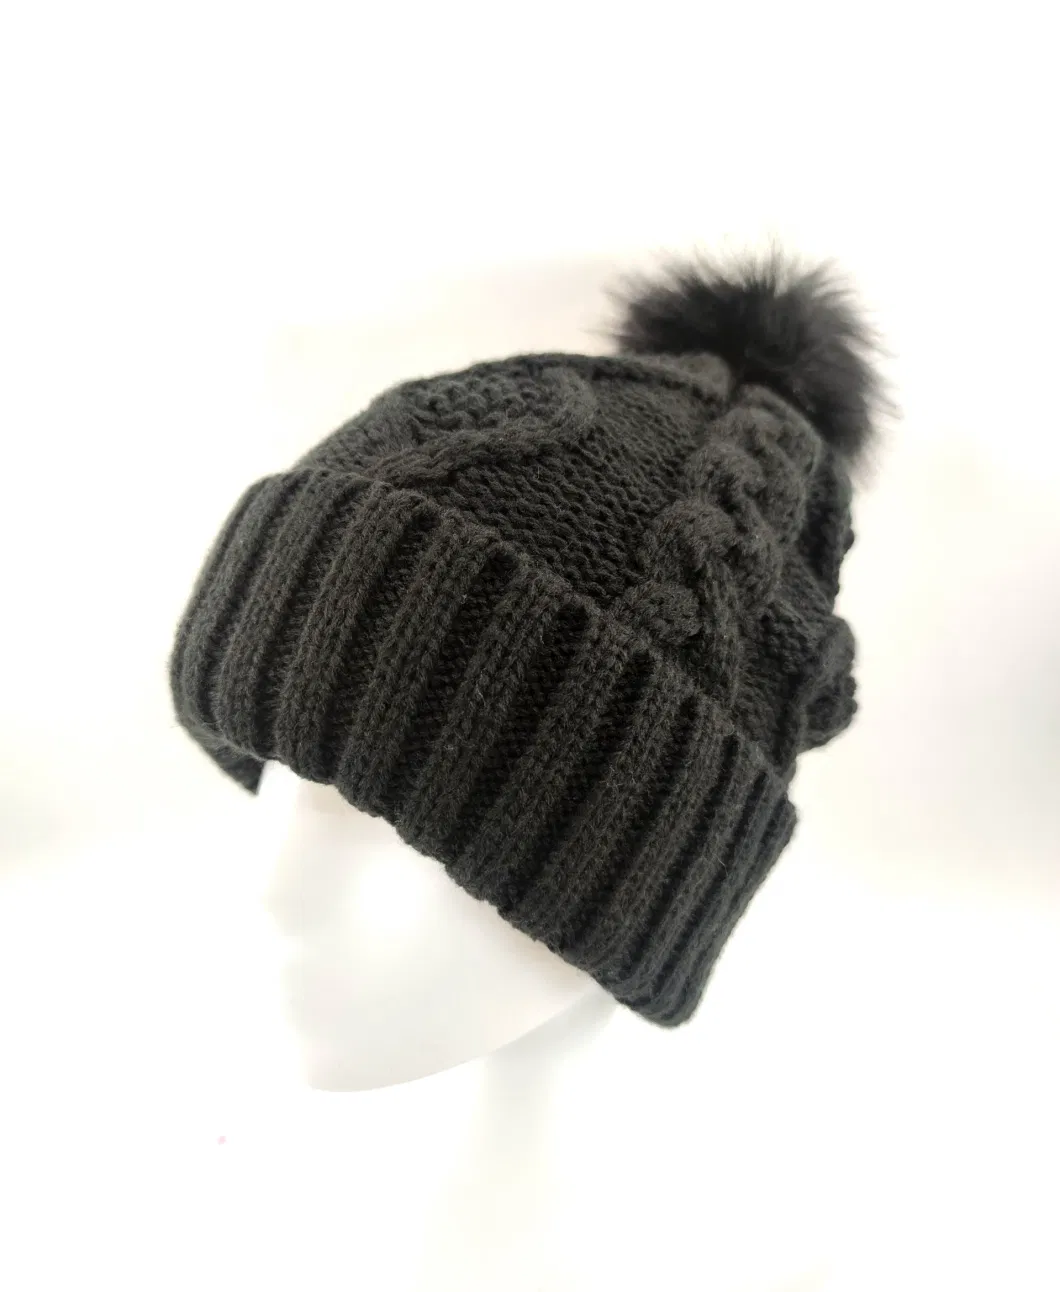 Acrylic Yarn Jacquard Knitted Hat with Cuff and Fake Fur Pompon, Half Fleece Lining.